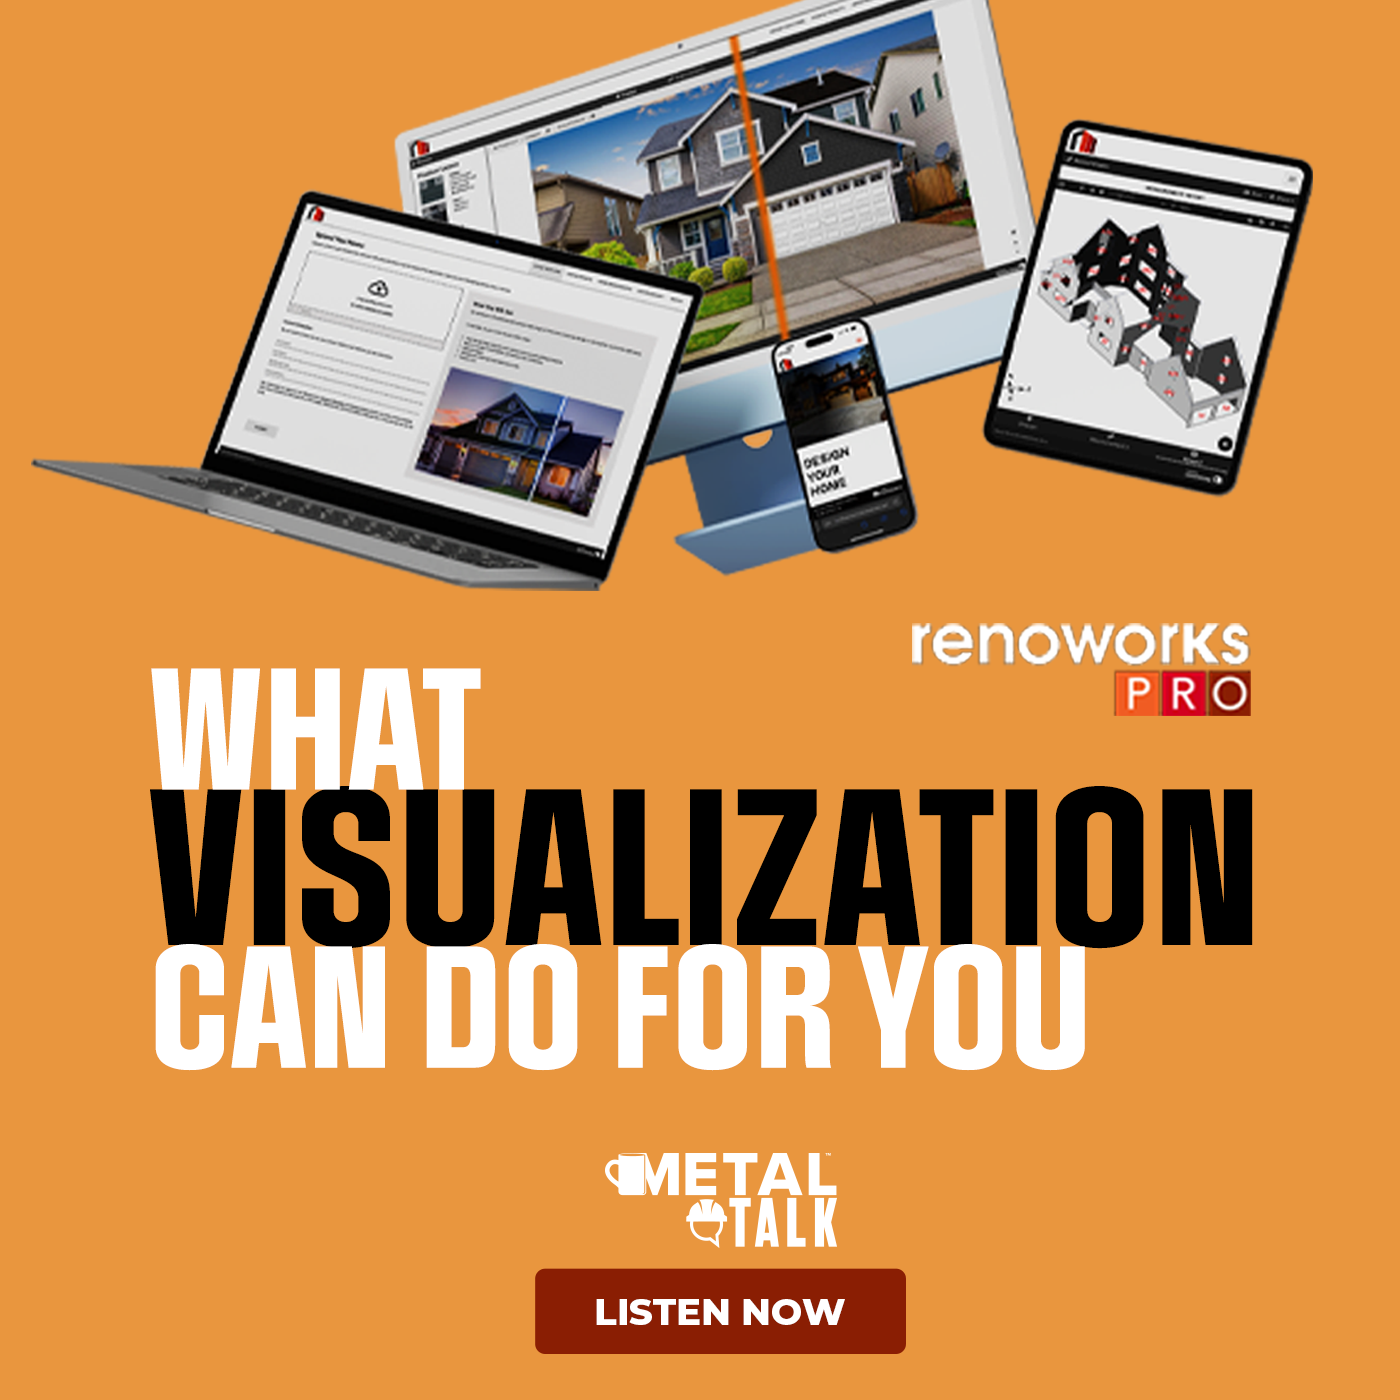 RenoWorks - MetalTalk - Using Visualization to Boost Your Business - POD